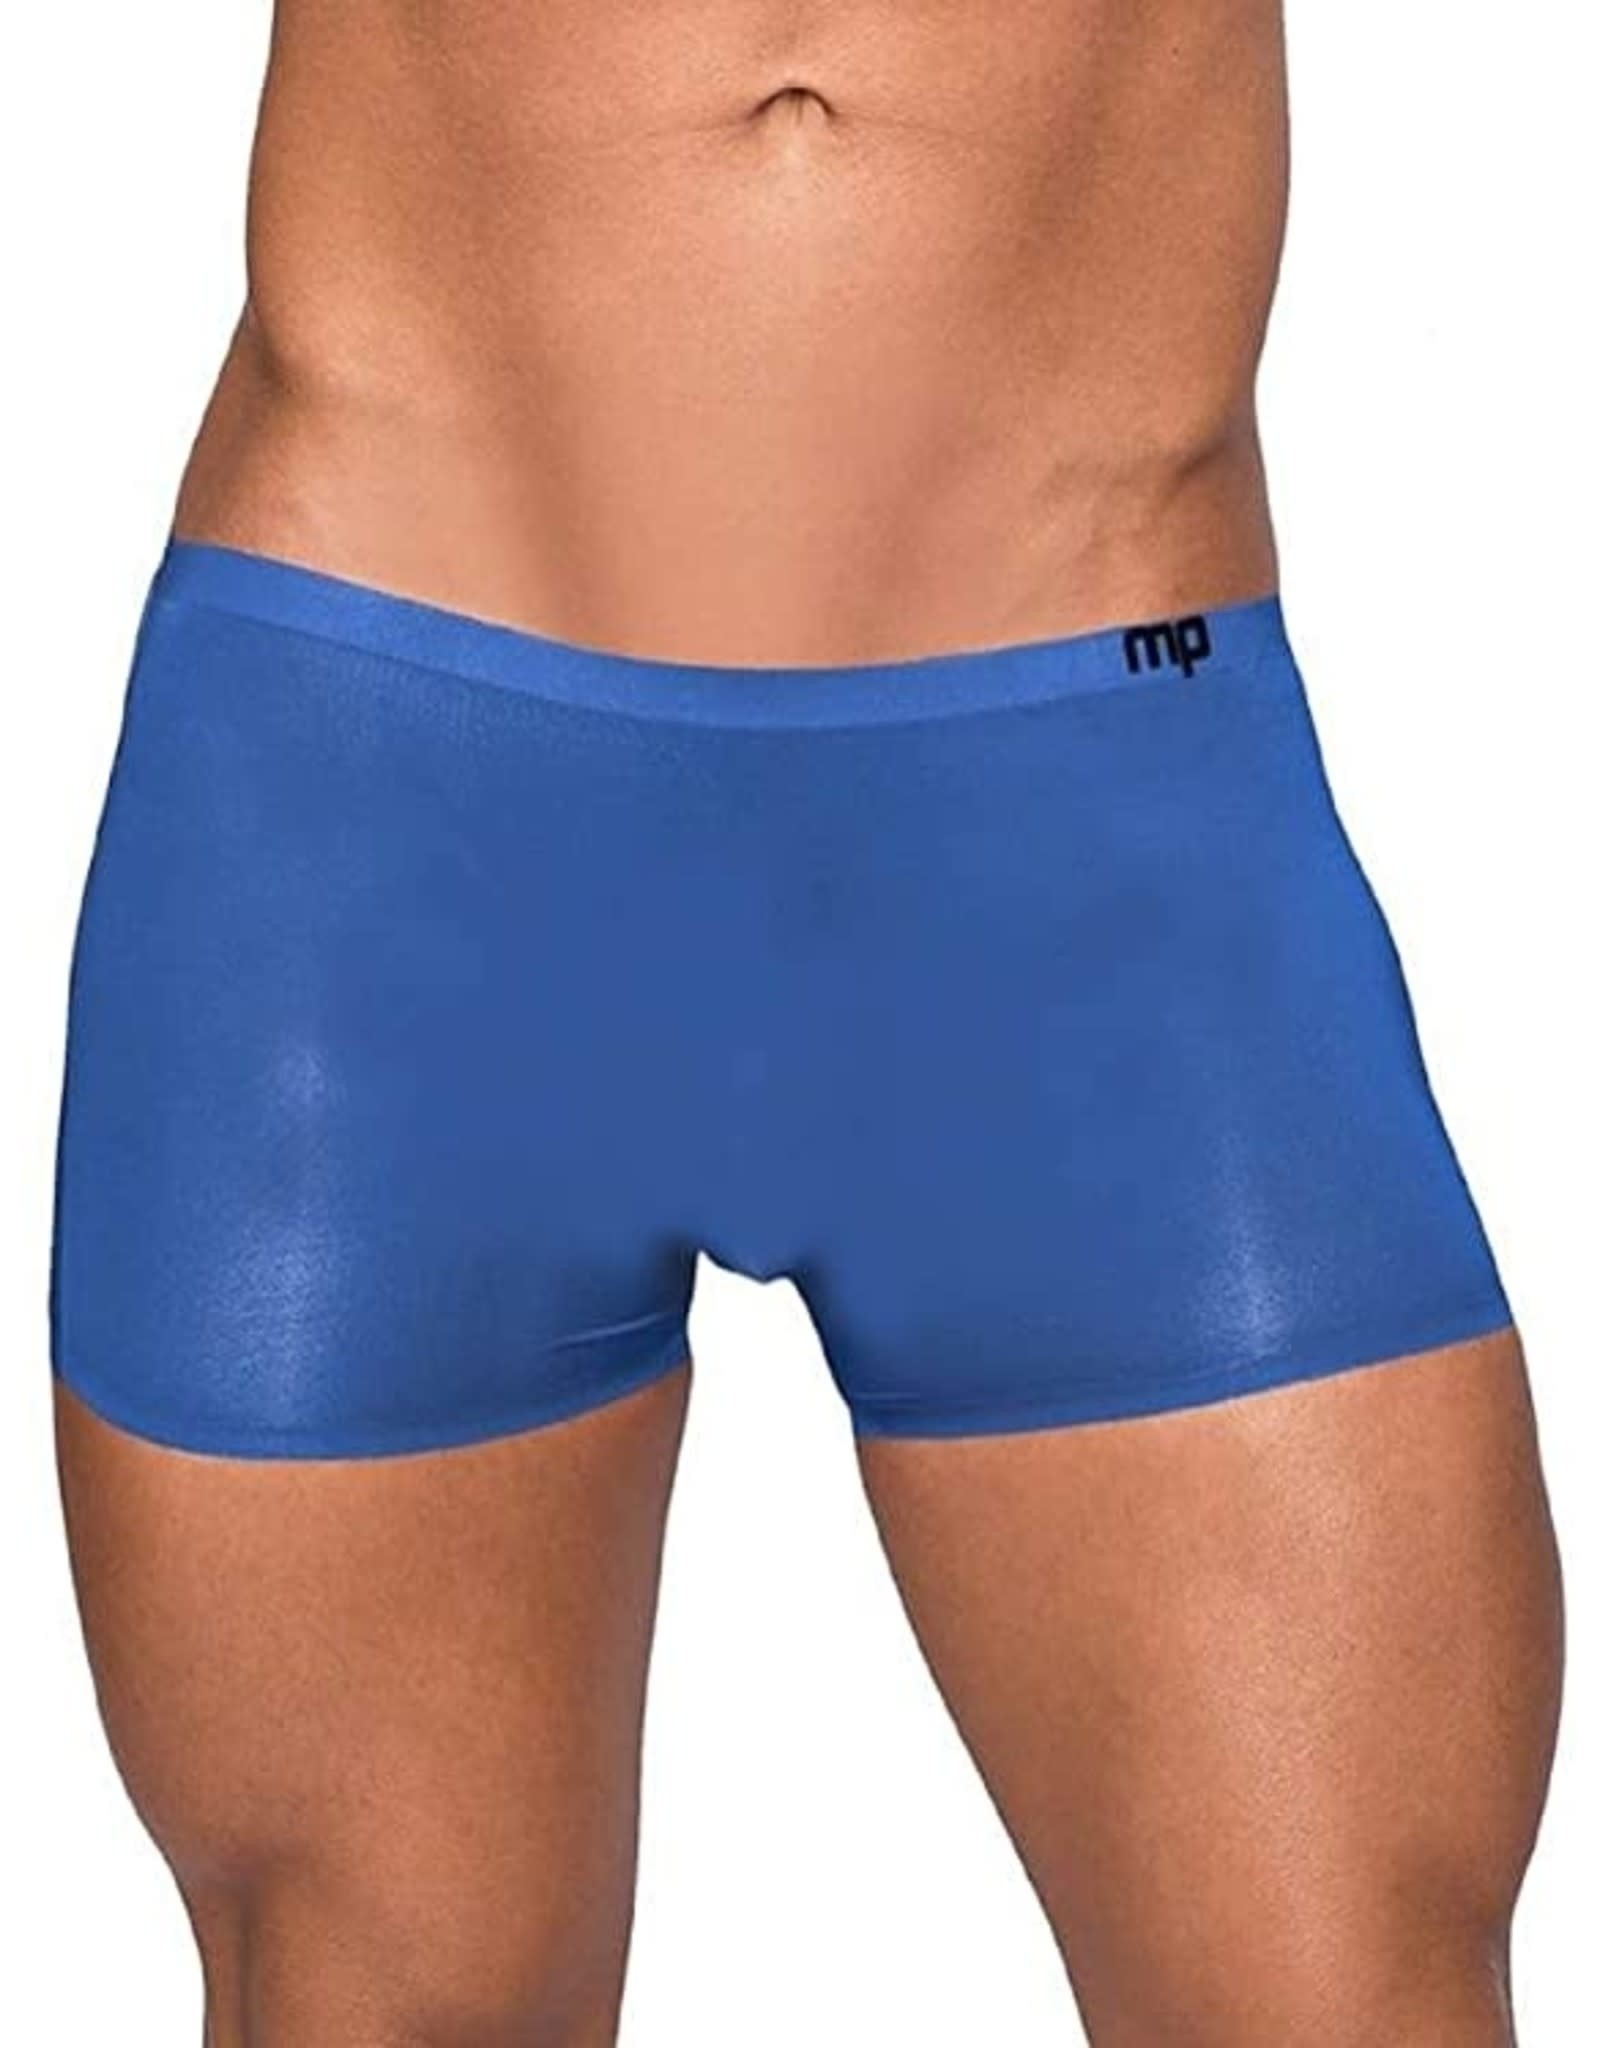 MALE POWER MALE POWER - SEAMLESS SLEEK BLUE SHORT WITH POUCH - S